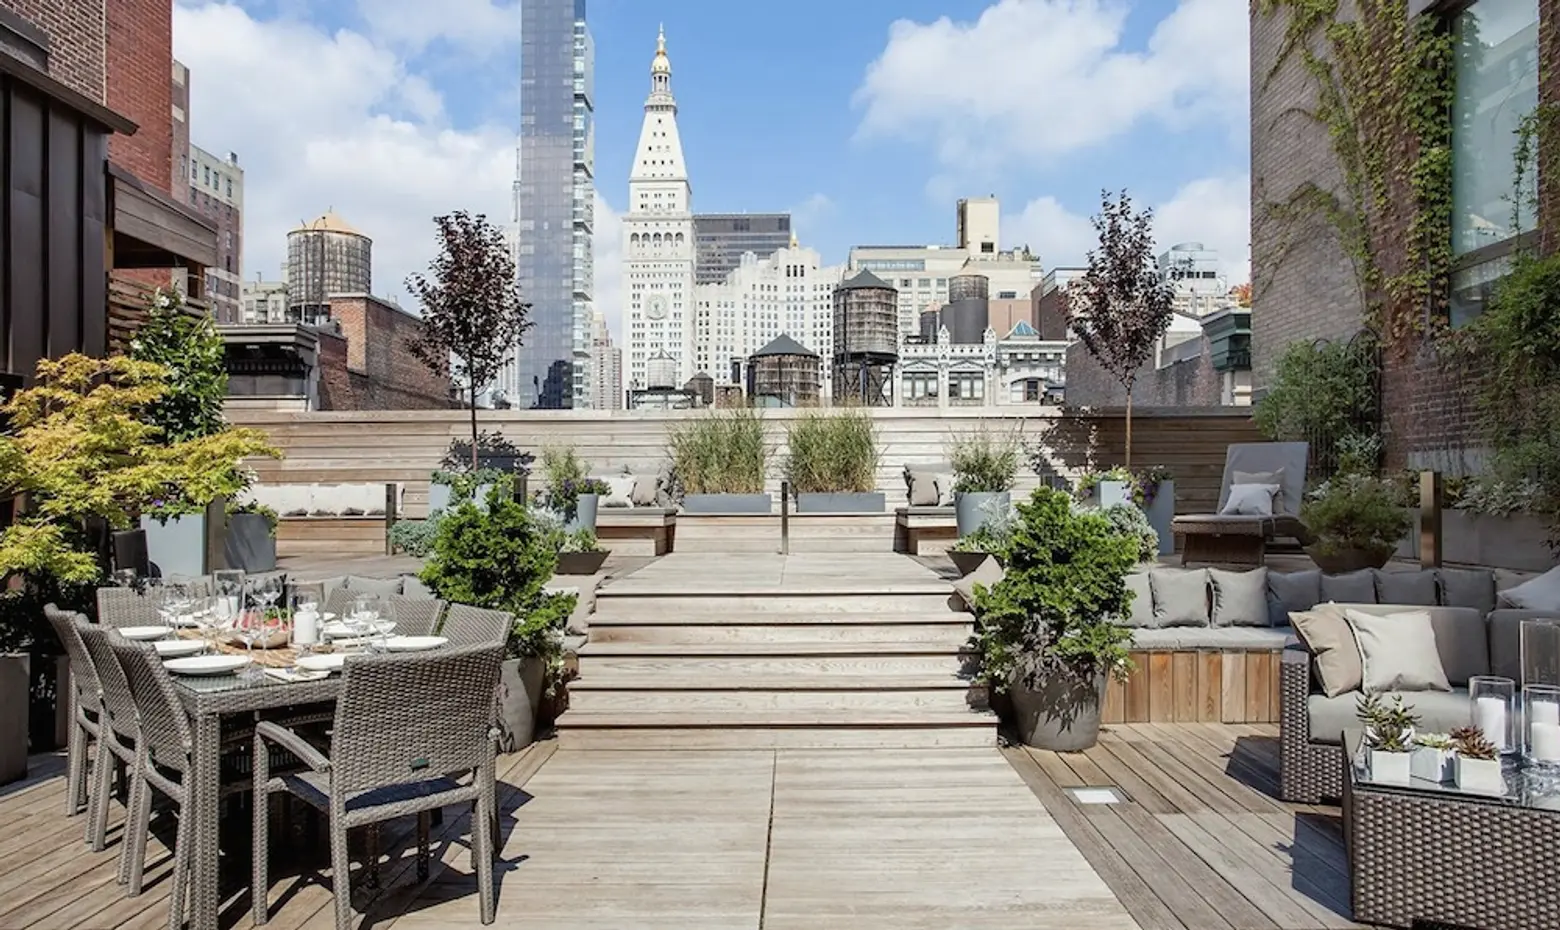 40 East 19th Street, spectacular outdoor space, rail-less stairs with built-ins